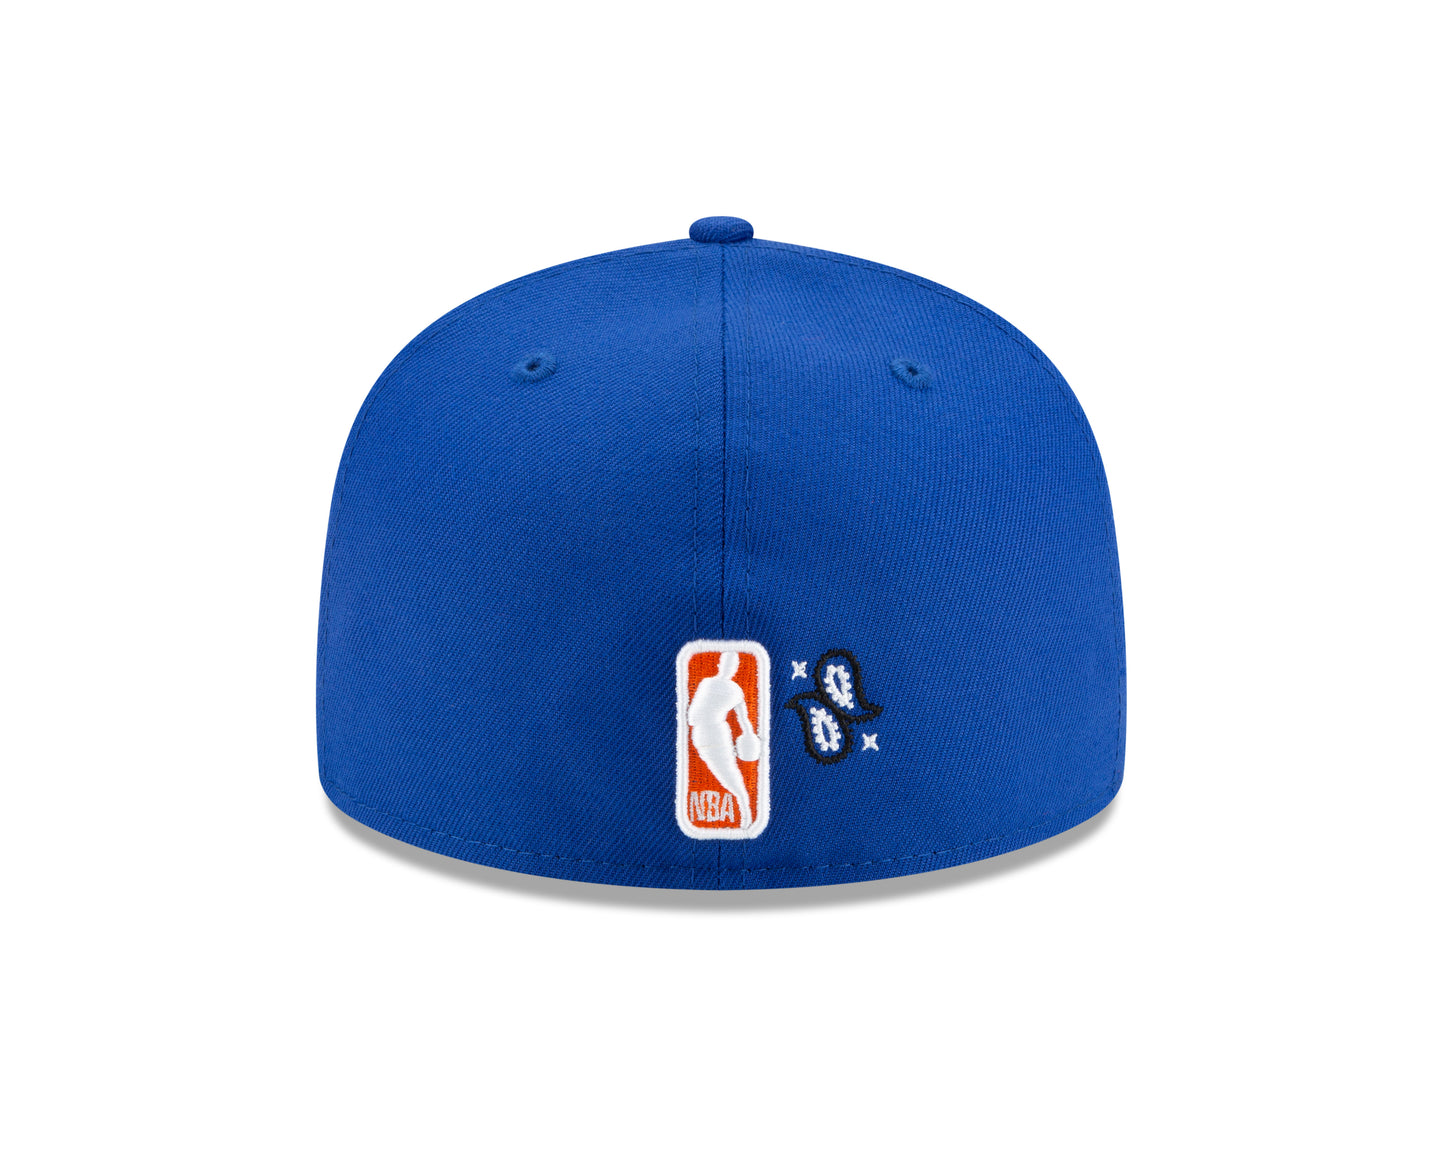 New York Knicks All Over Print Paisley 59Fifty Fitted Hat